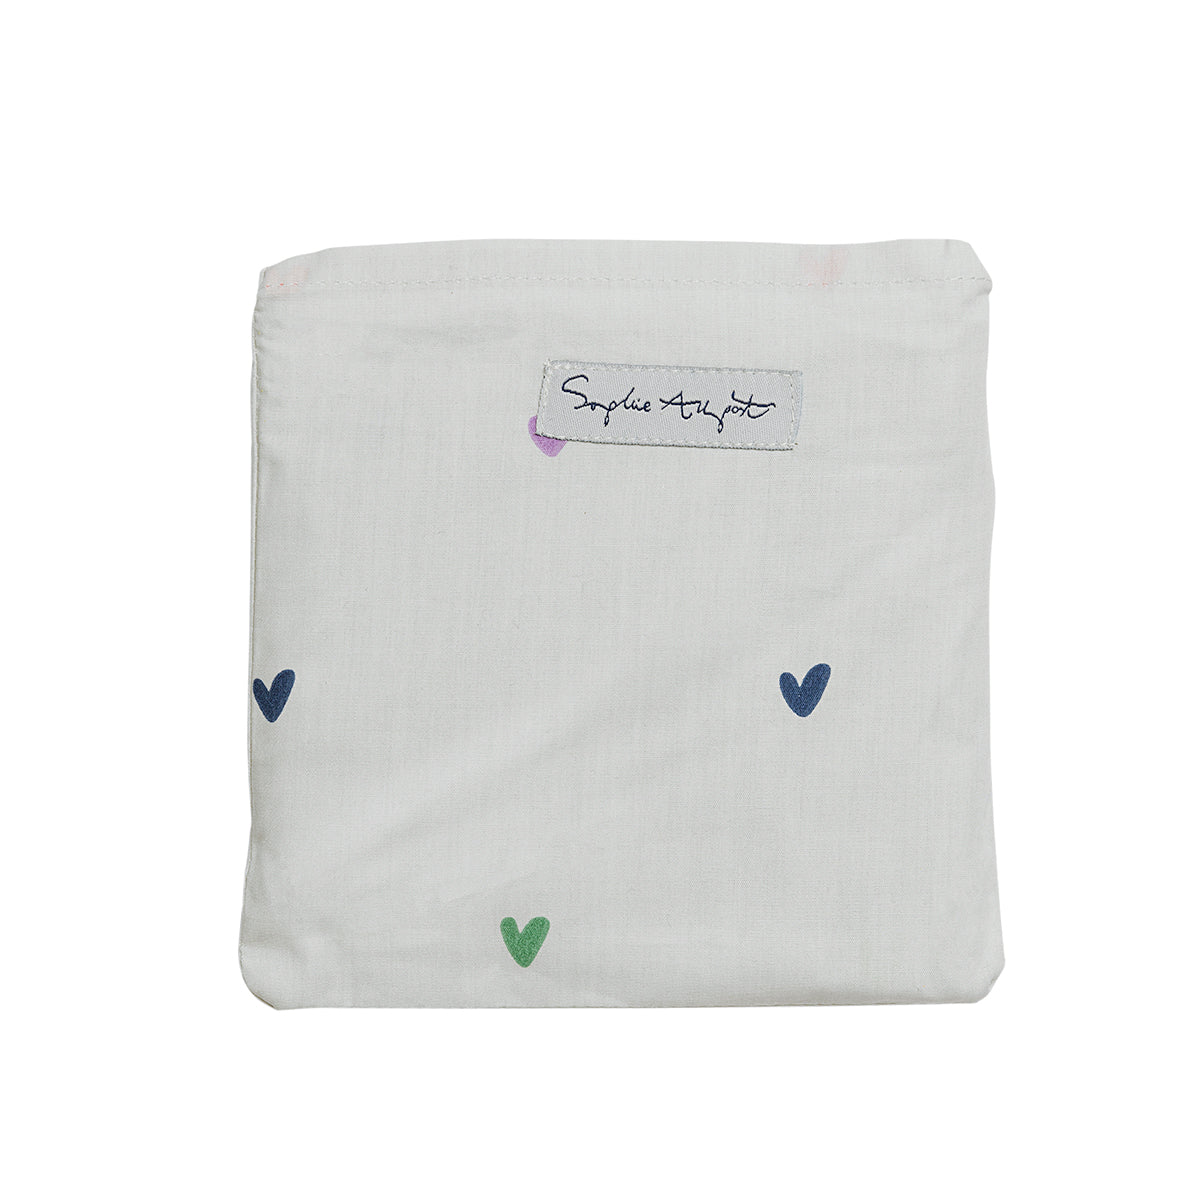 Multicoloured Hearts Folding Shopping Bags by Sophie Allport